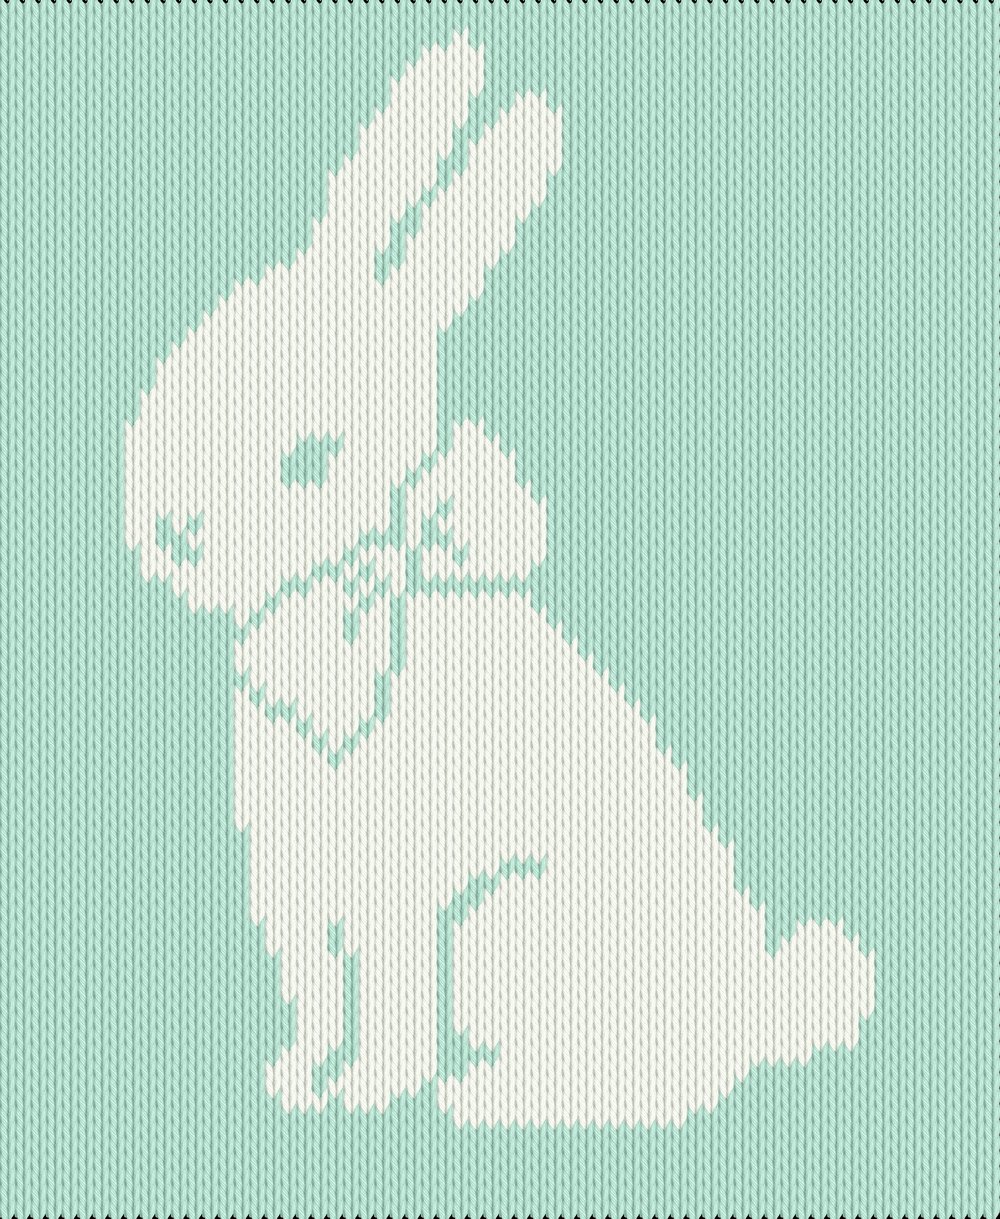 Knitting motif chart, bunny with bow